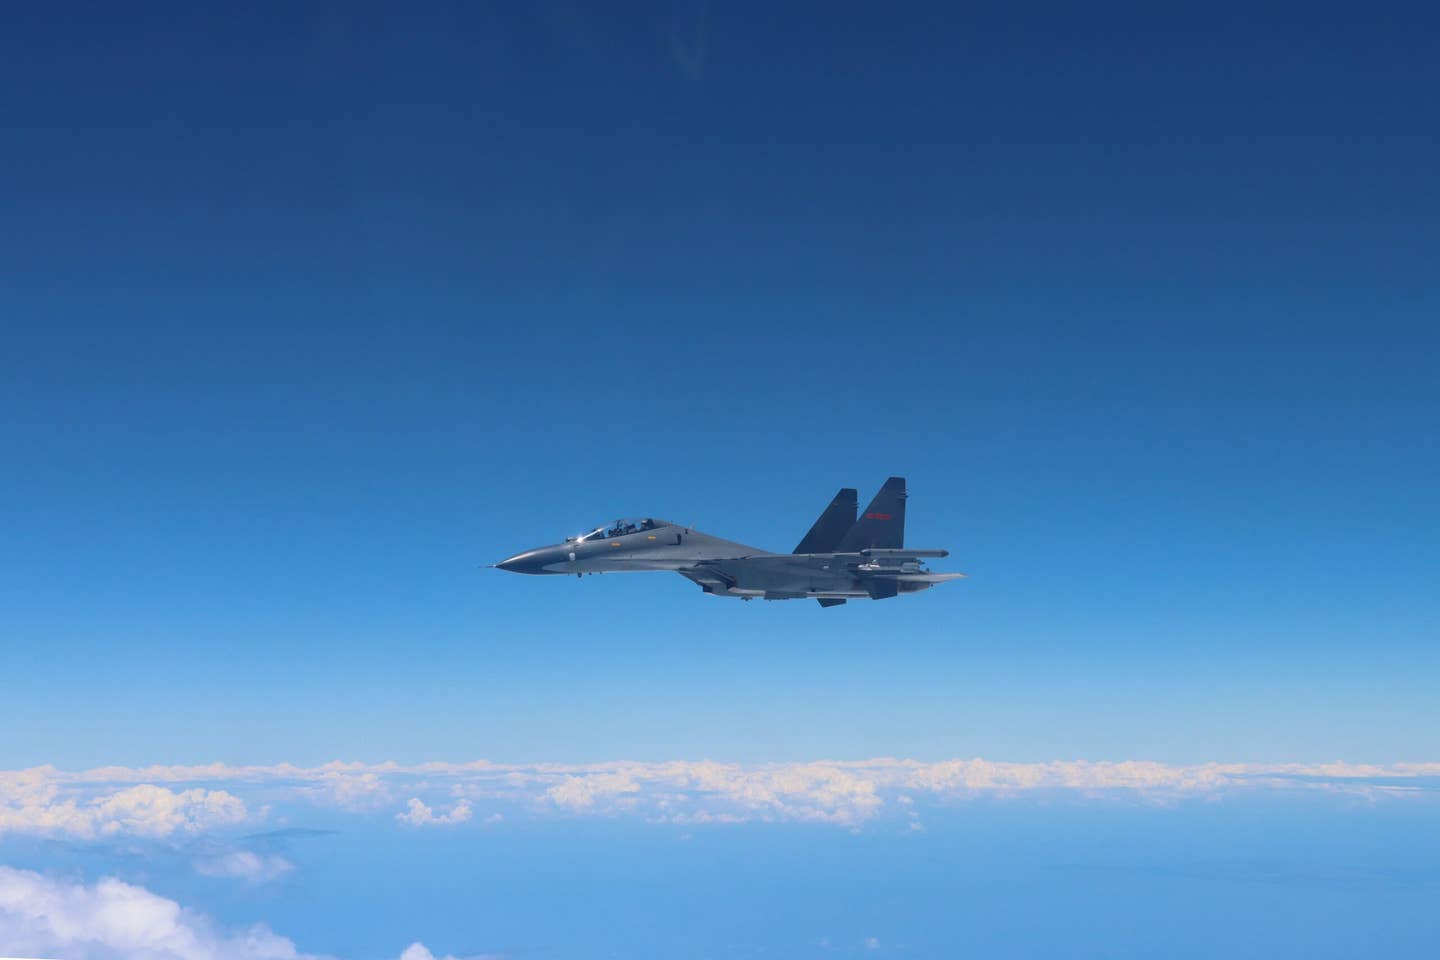 A Su-30 Flanker multirole fighter jet of the Eastern Theater Command of the PLA conducts operations around Taiwan, in August 2022.&nbsp;<em>Photo by Hua Junxiao/Xinhua via Getty Images</em>